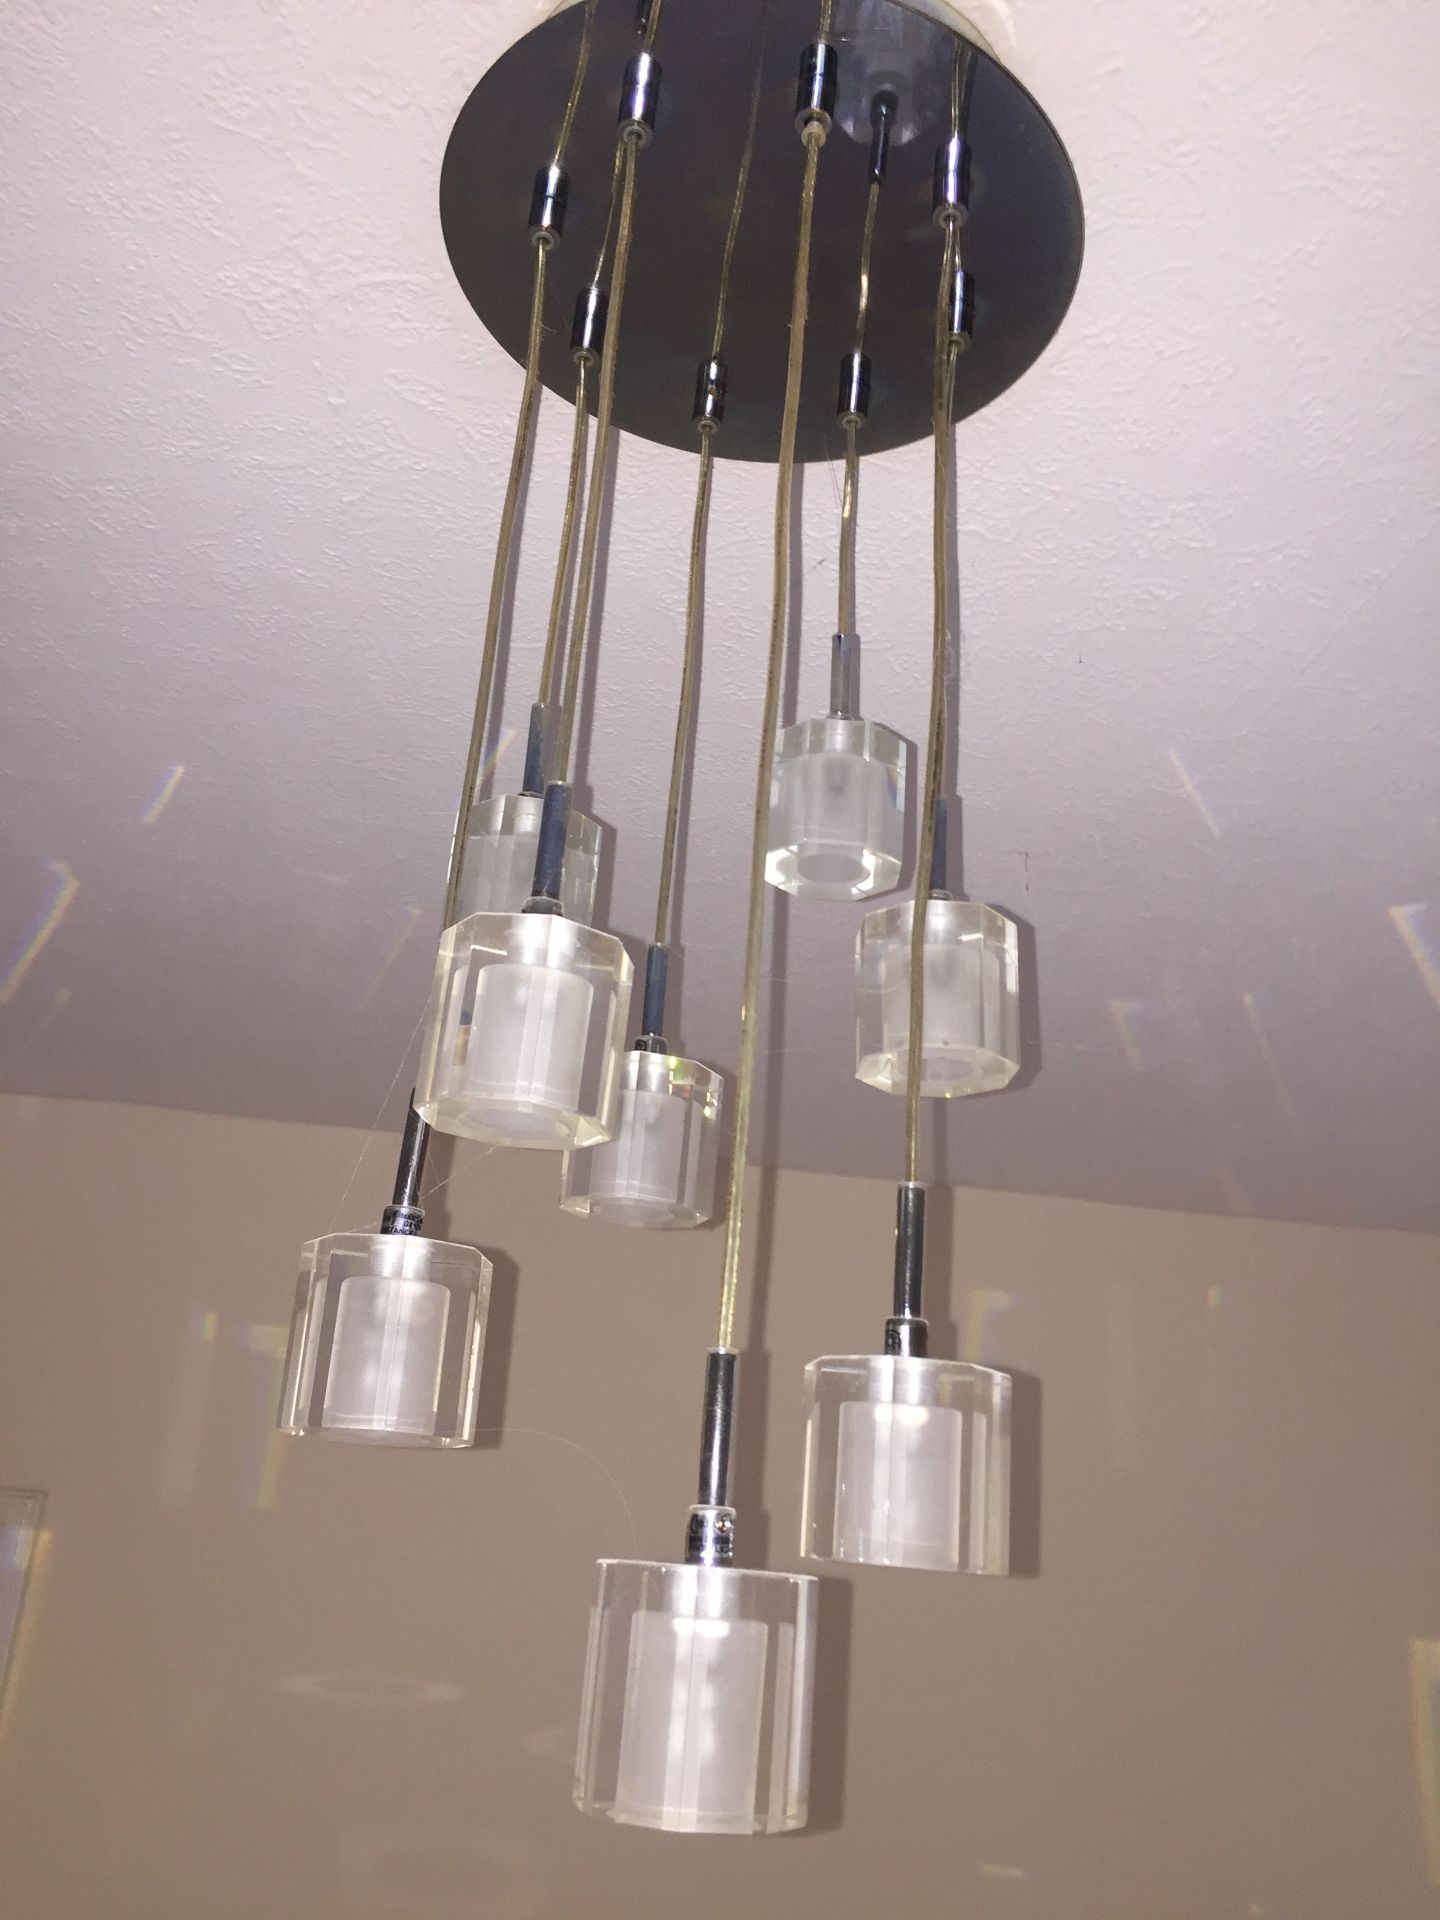 1 x Retro 60s Style Ceiling Light Fitting With Glass Shades And Chrome Ceiling Plate - Dimensions: - Image 5 of 5